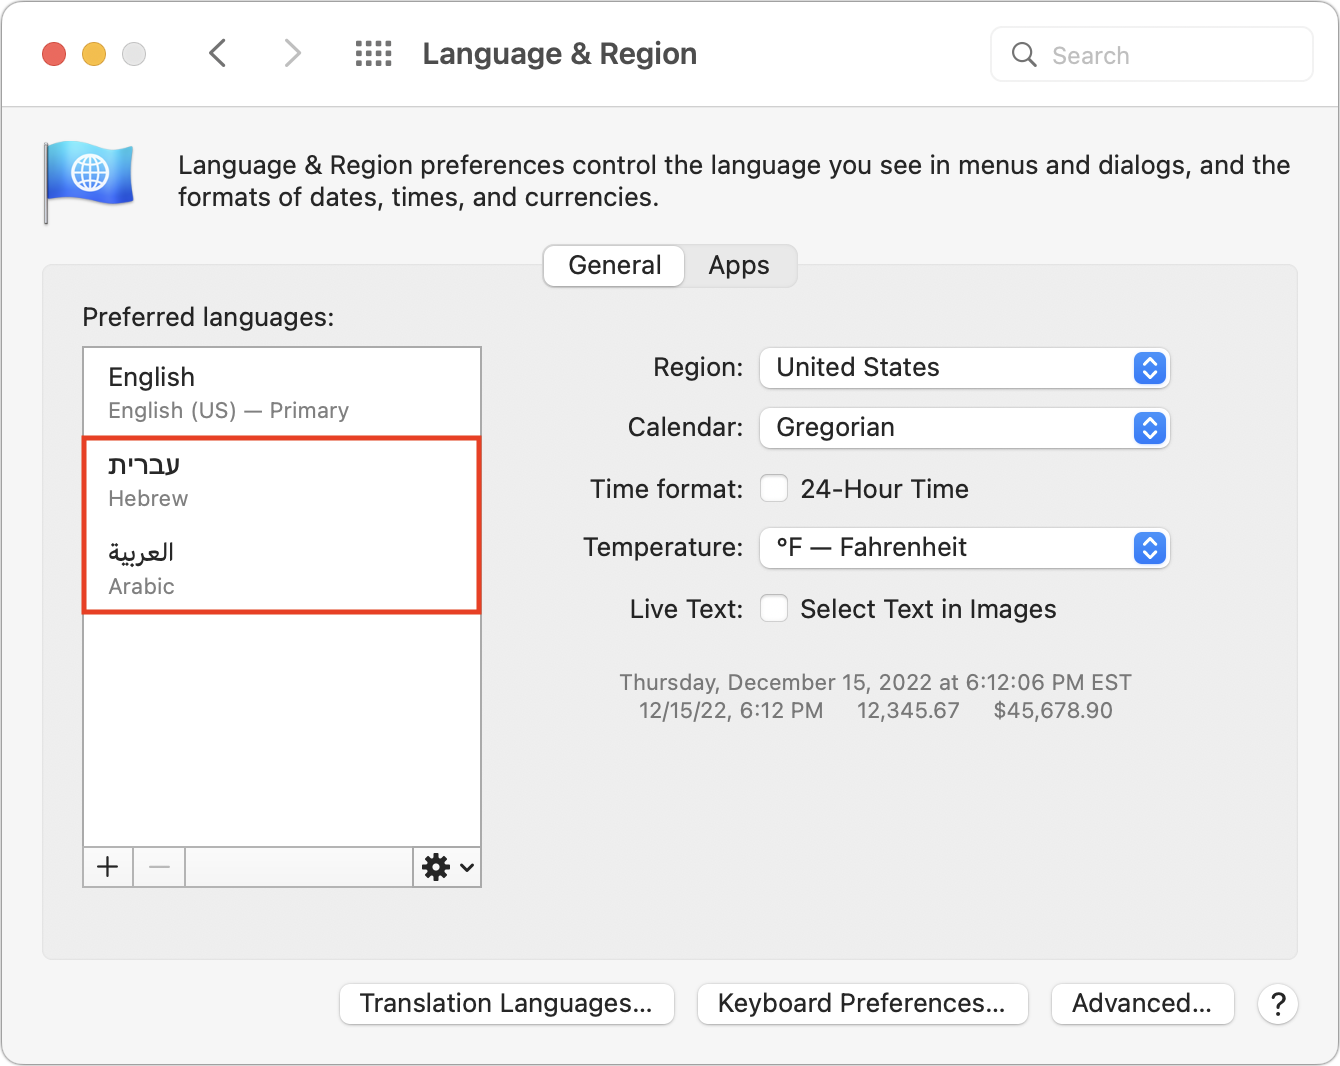 Hebrew and Arabic in the Language & Region preference pane